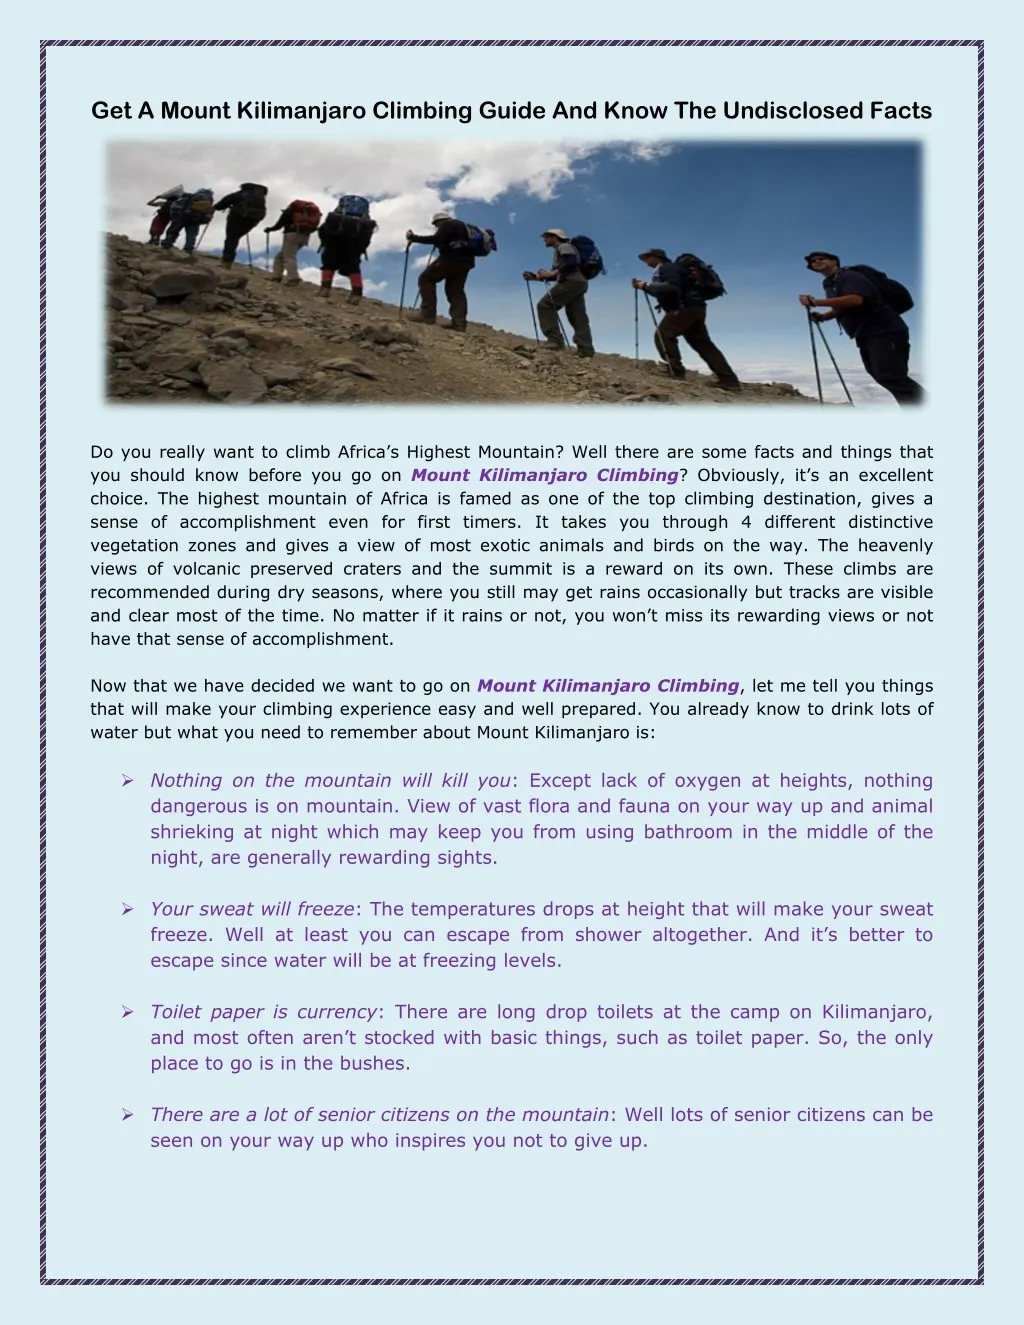 get a mount kilimanjaro climbing guide and know